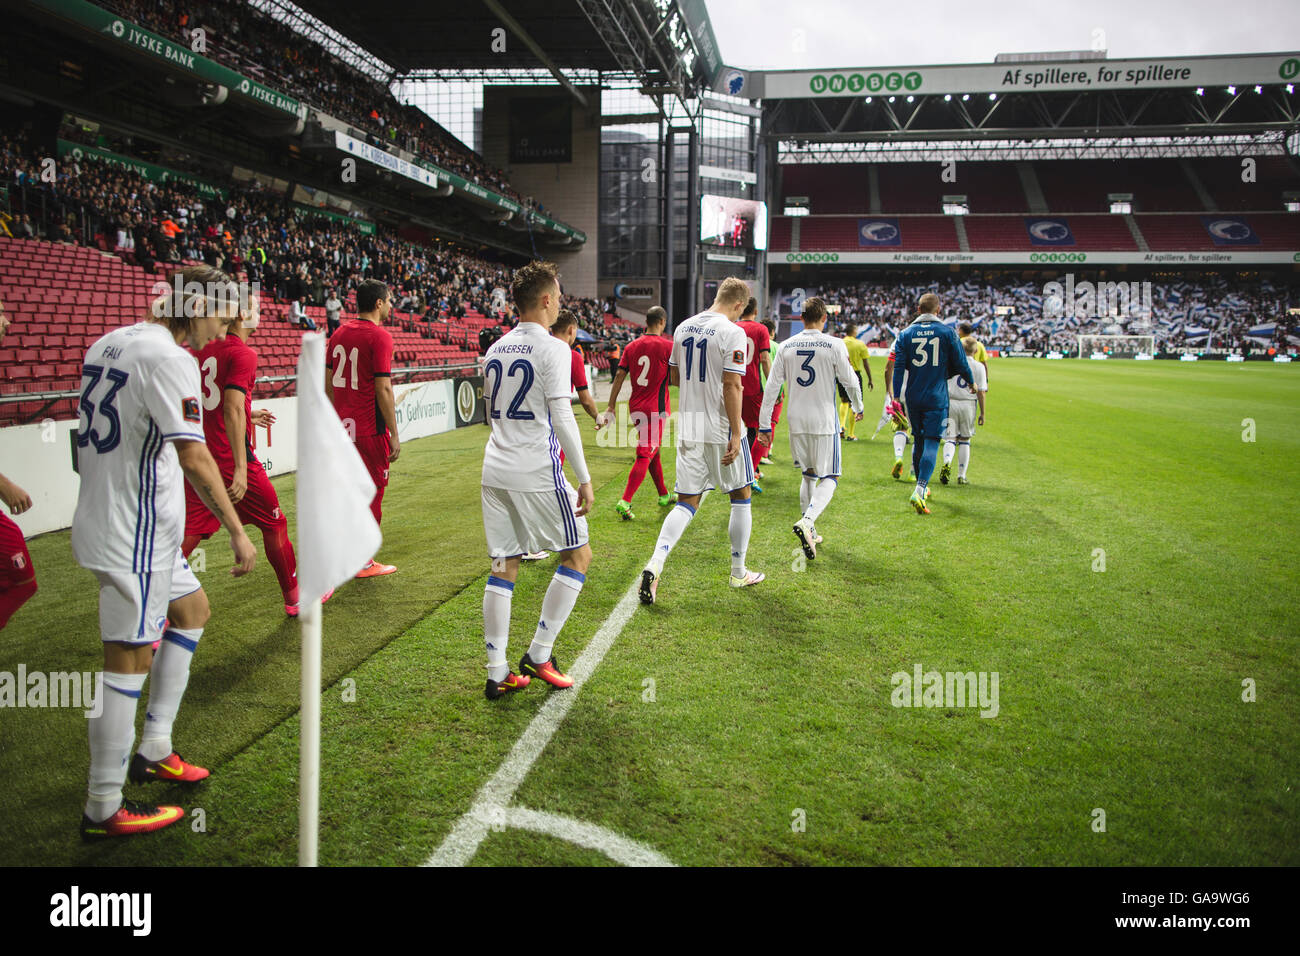 Copenhagen, Denmark. August 3rd 2016. The players enter Telia Parken during the UEFA Champions League qualification match between FC Copenhagen and FC Astra Giurgiu. FC Copenhagen won the match 3-0 and a through to the play-off round. © Samy Khabthani/Alamy Live News Stock Photo